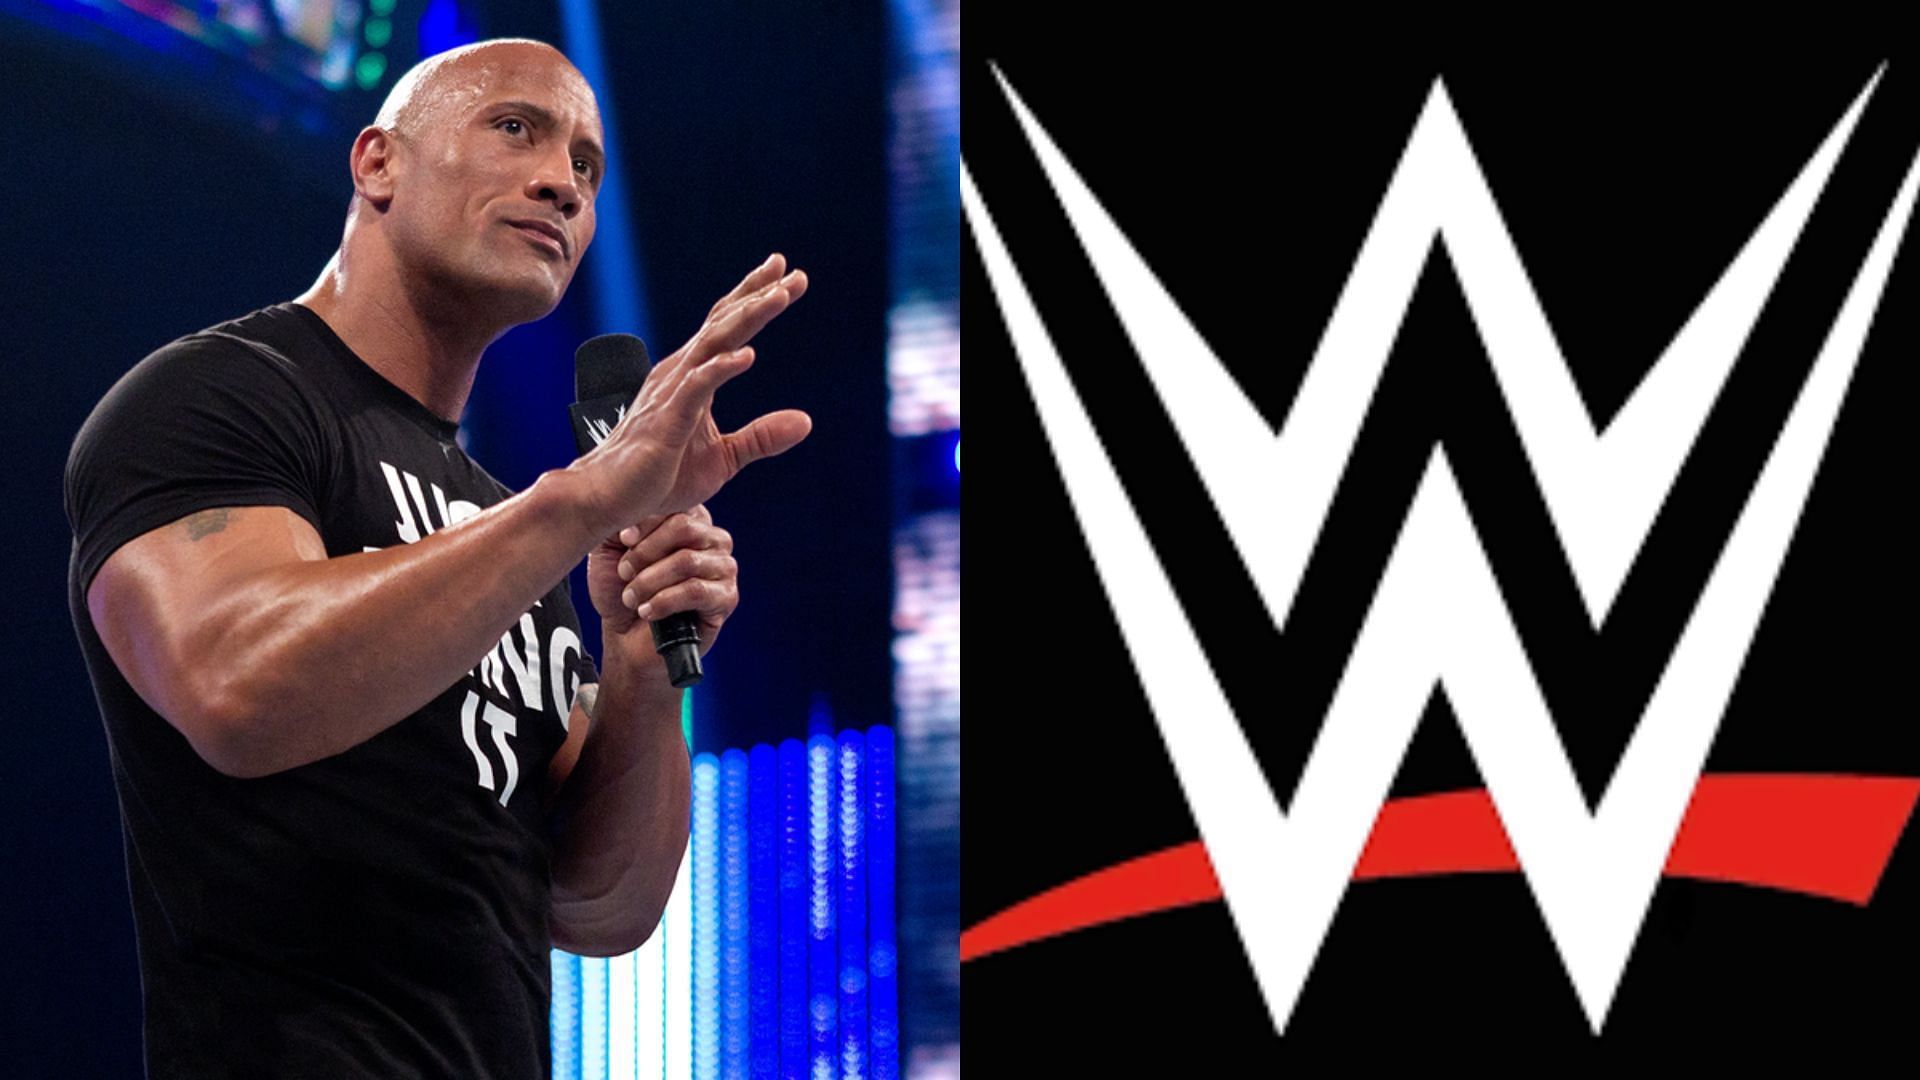 The Rock has made a recent return to WWE